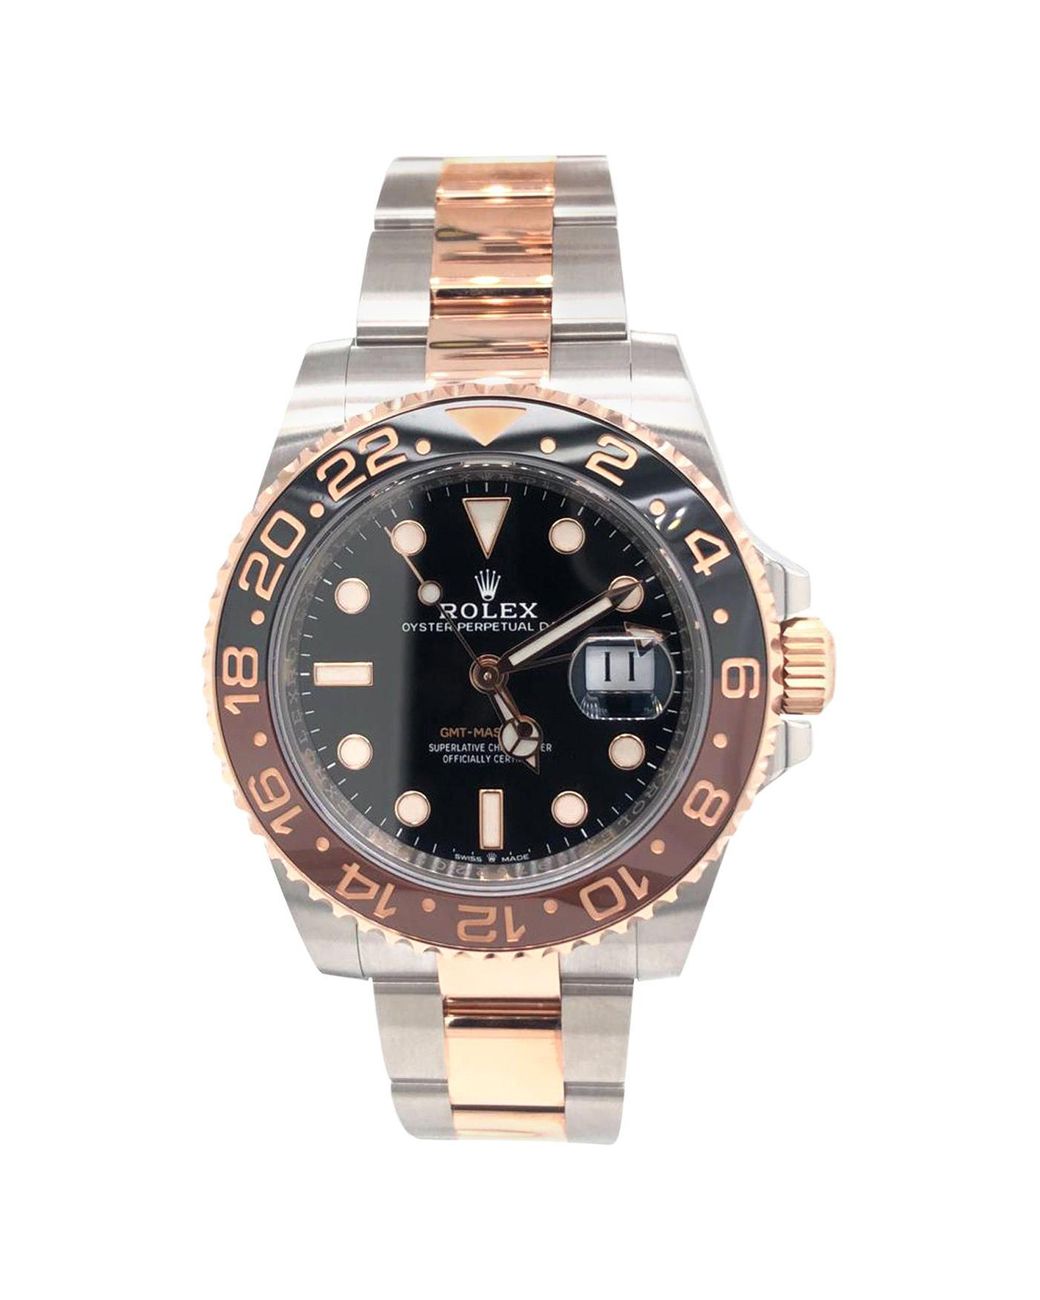 Rolex Gmt-master Ii 126711chnr Dial Root Beer Bezel Oyster ...